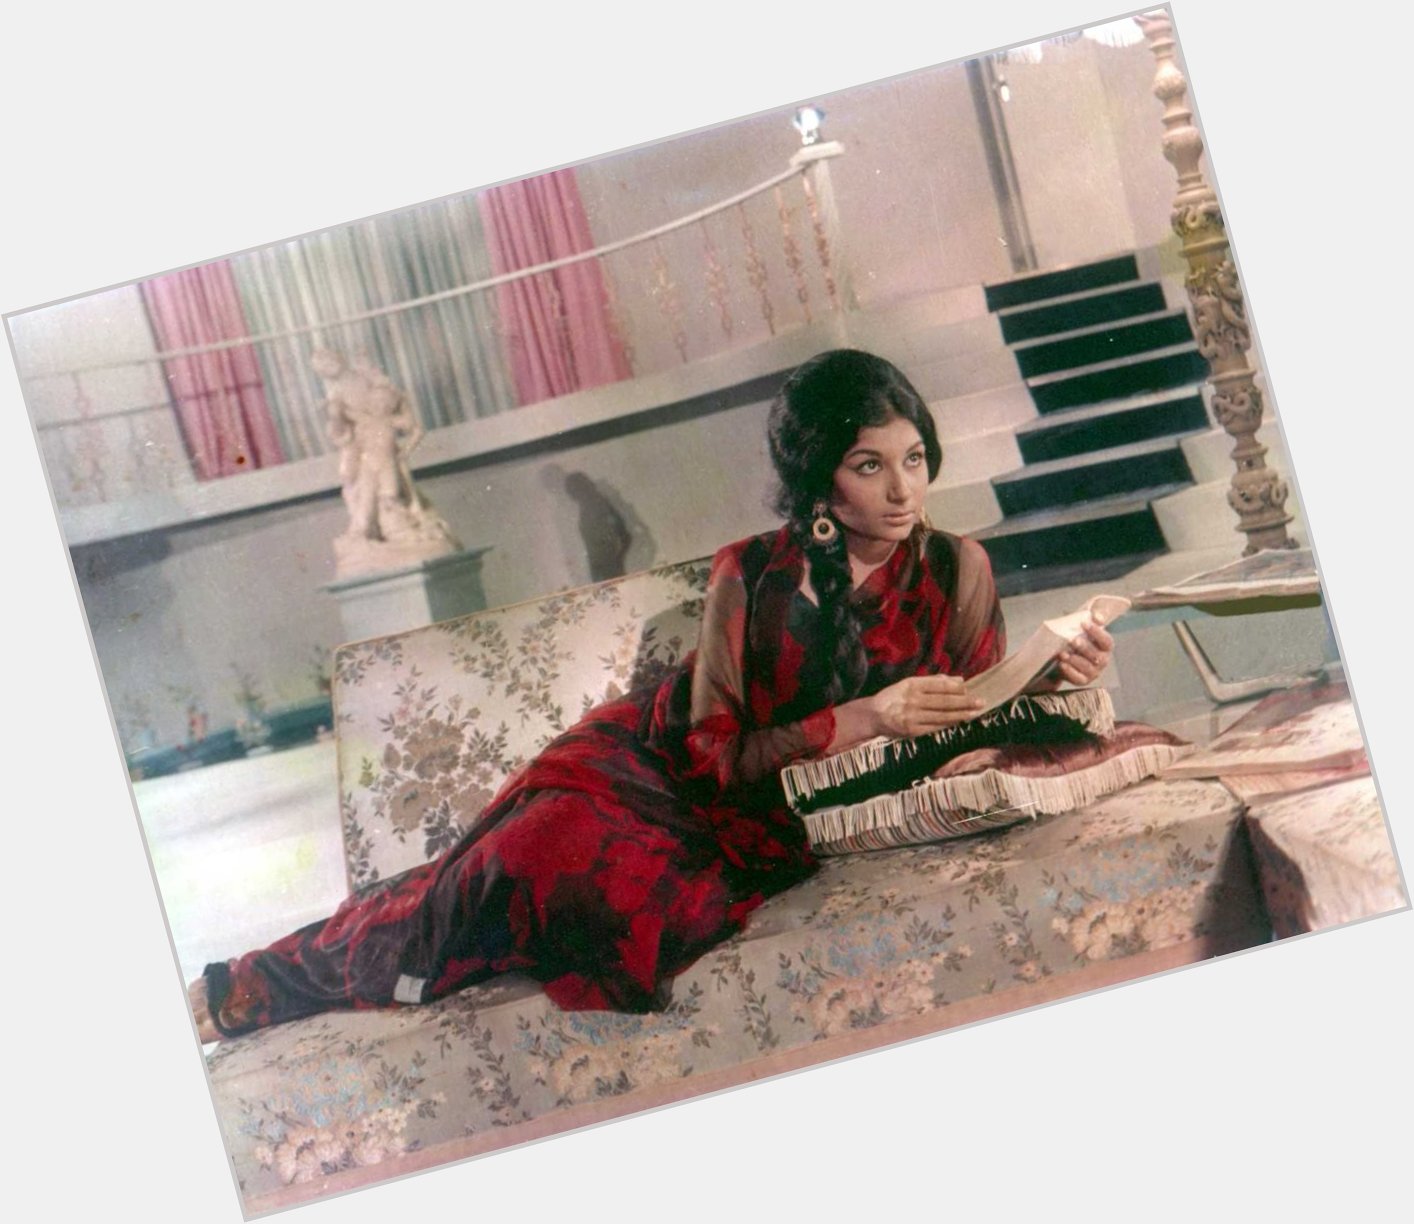 Happy Birthday, Sharmila Tagore! Born on this day in 1944. 